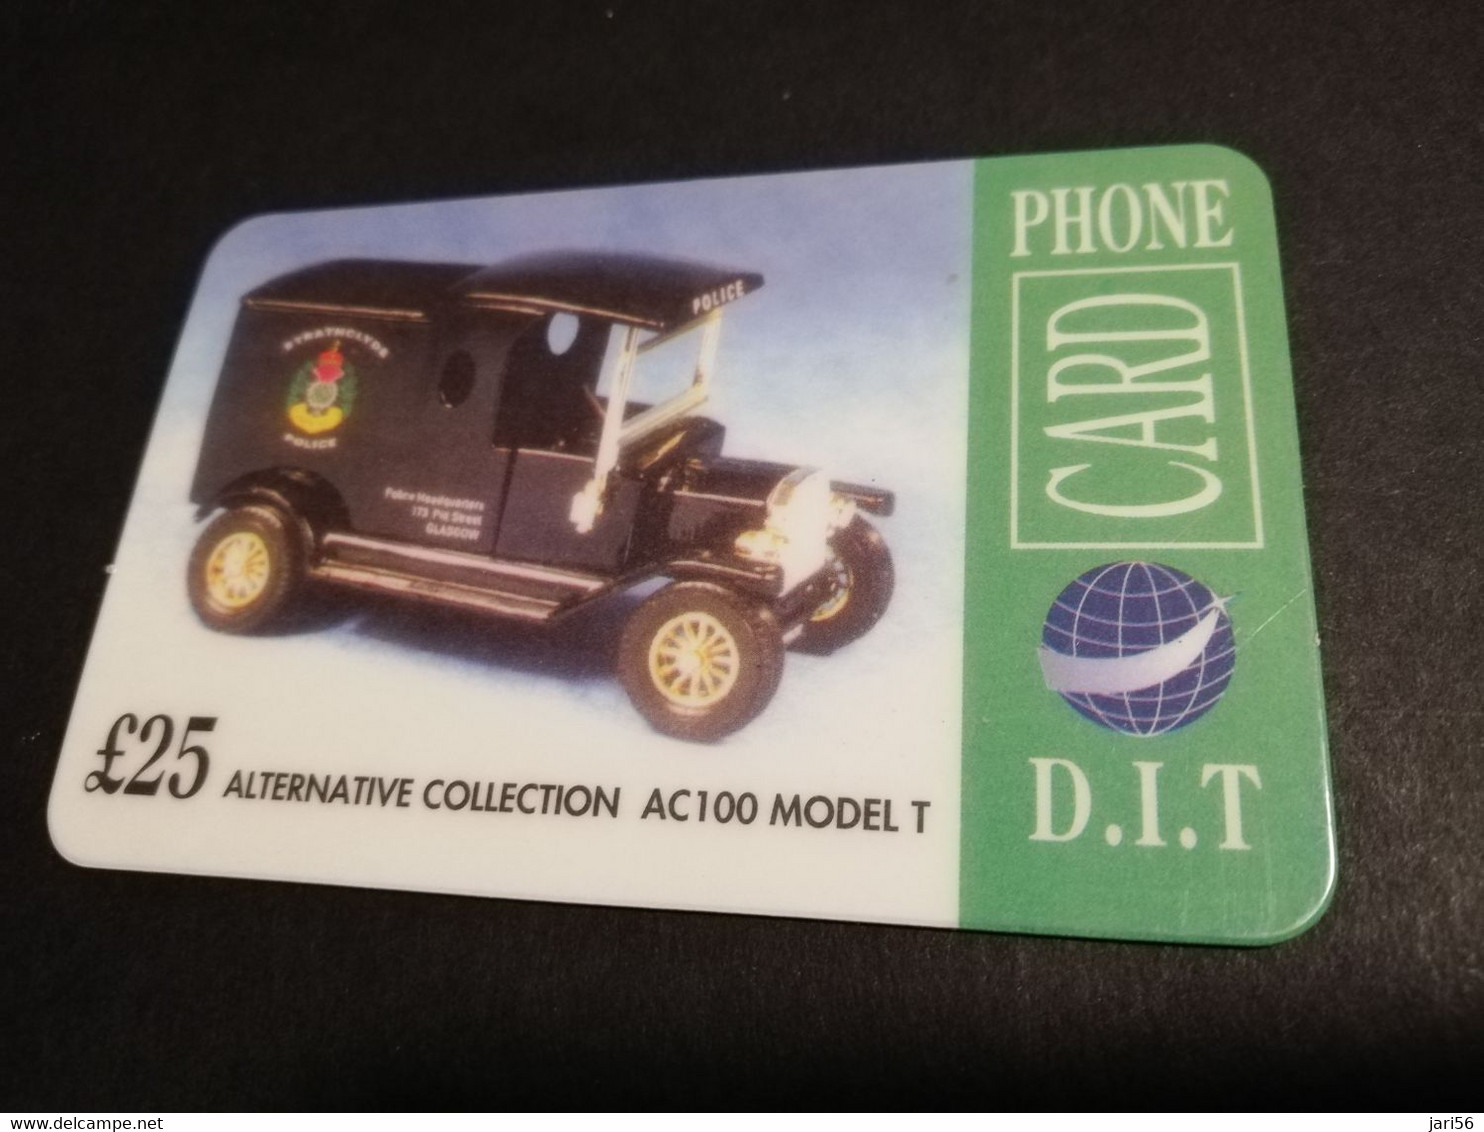 GREAT BRITAIN   25 POUND  AIR PLANES   CAR/ RENAULT AC 100 MODEL T  DIT PHONECARD    PREPAID CARD      **5903** - [10] Collections